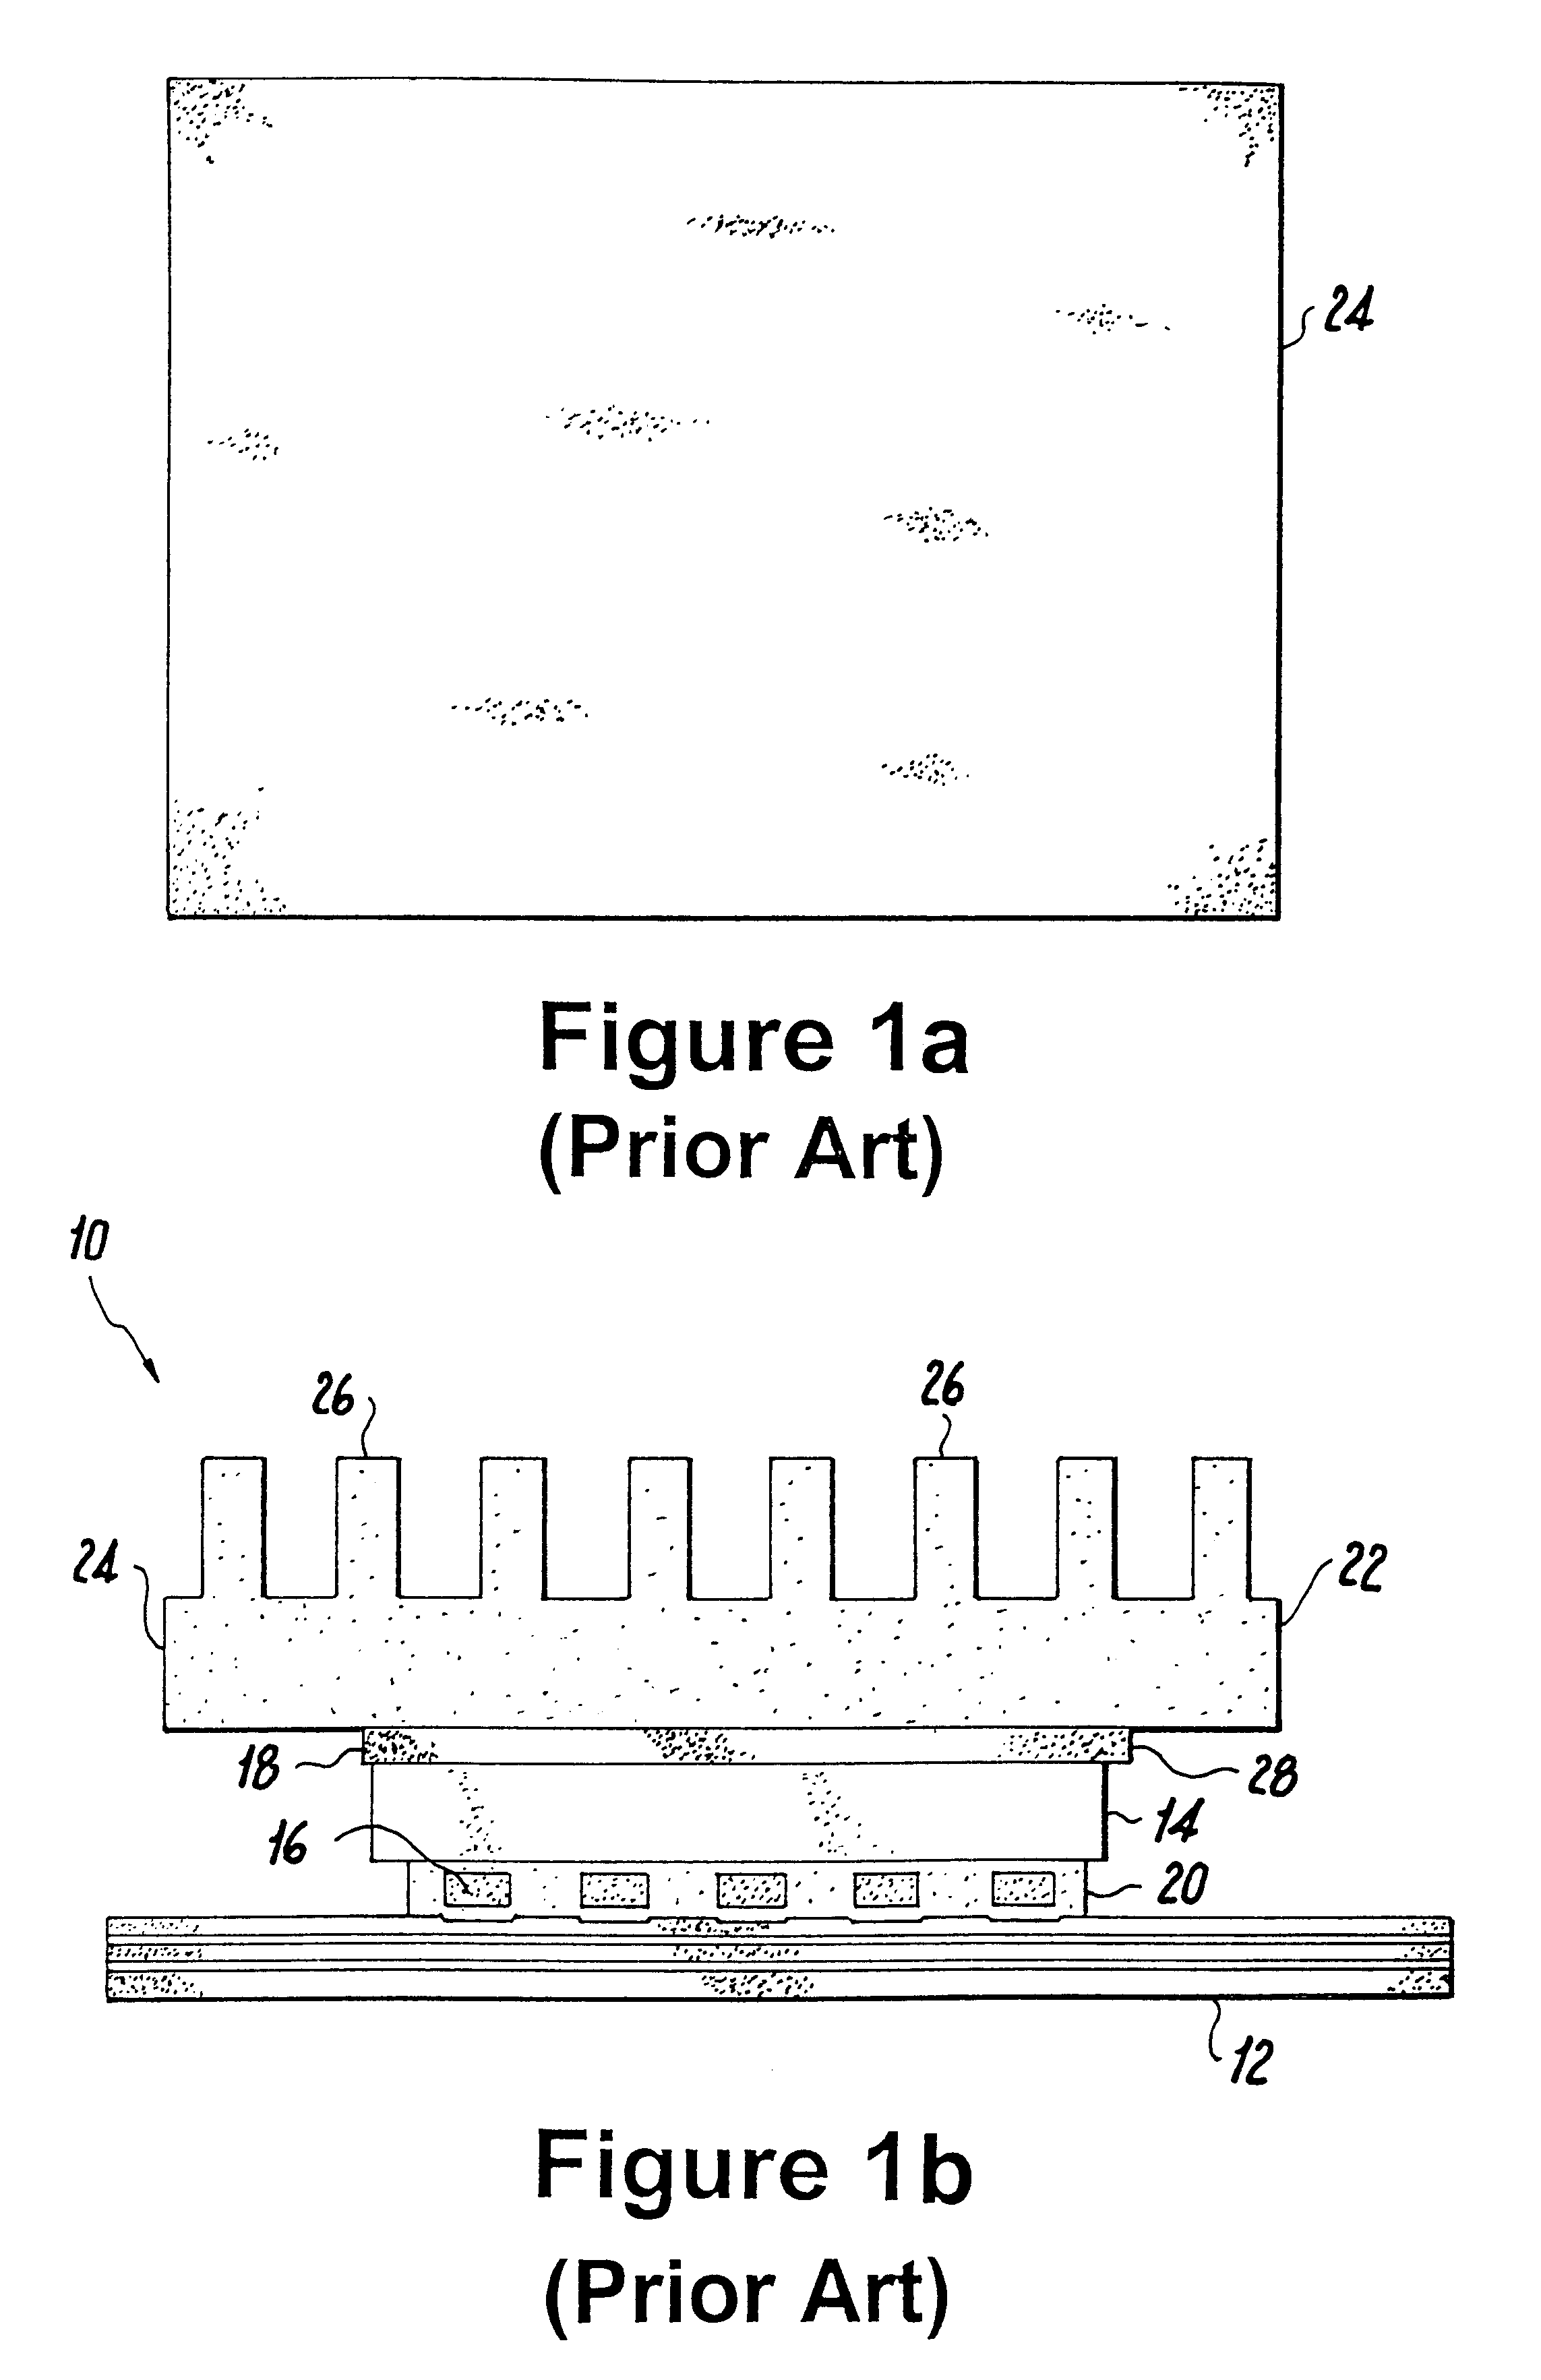 Stress-relieving heatsink structure and method of attachment to an electronic package